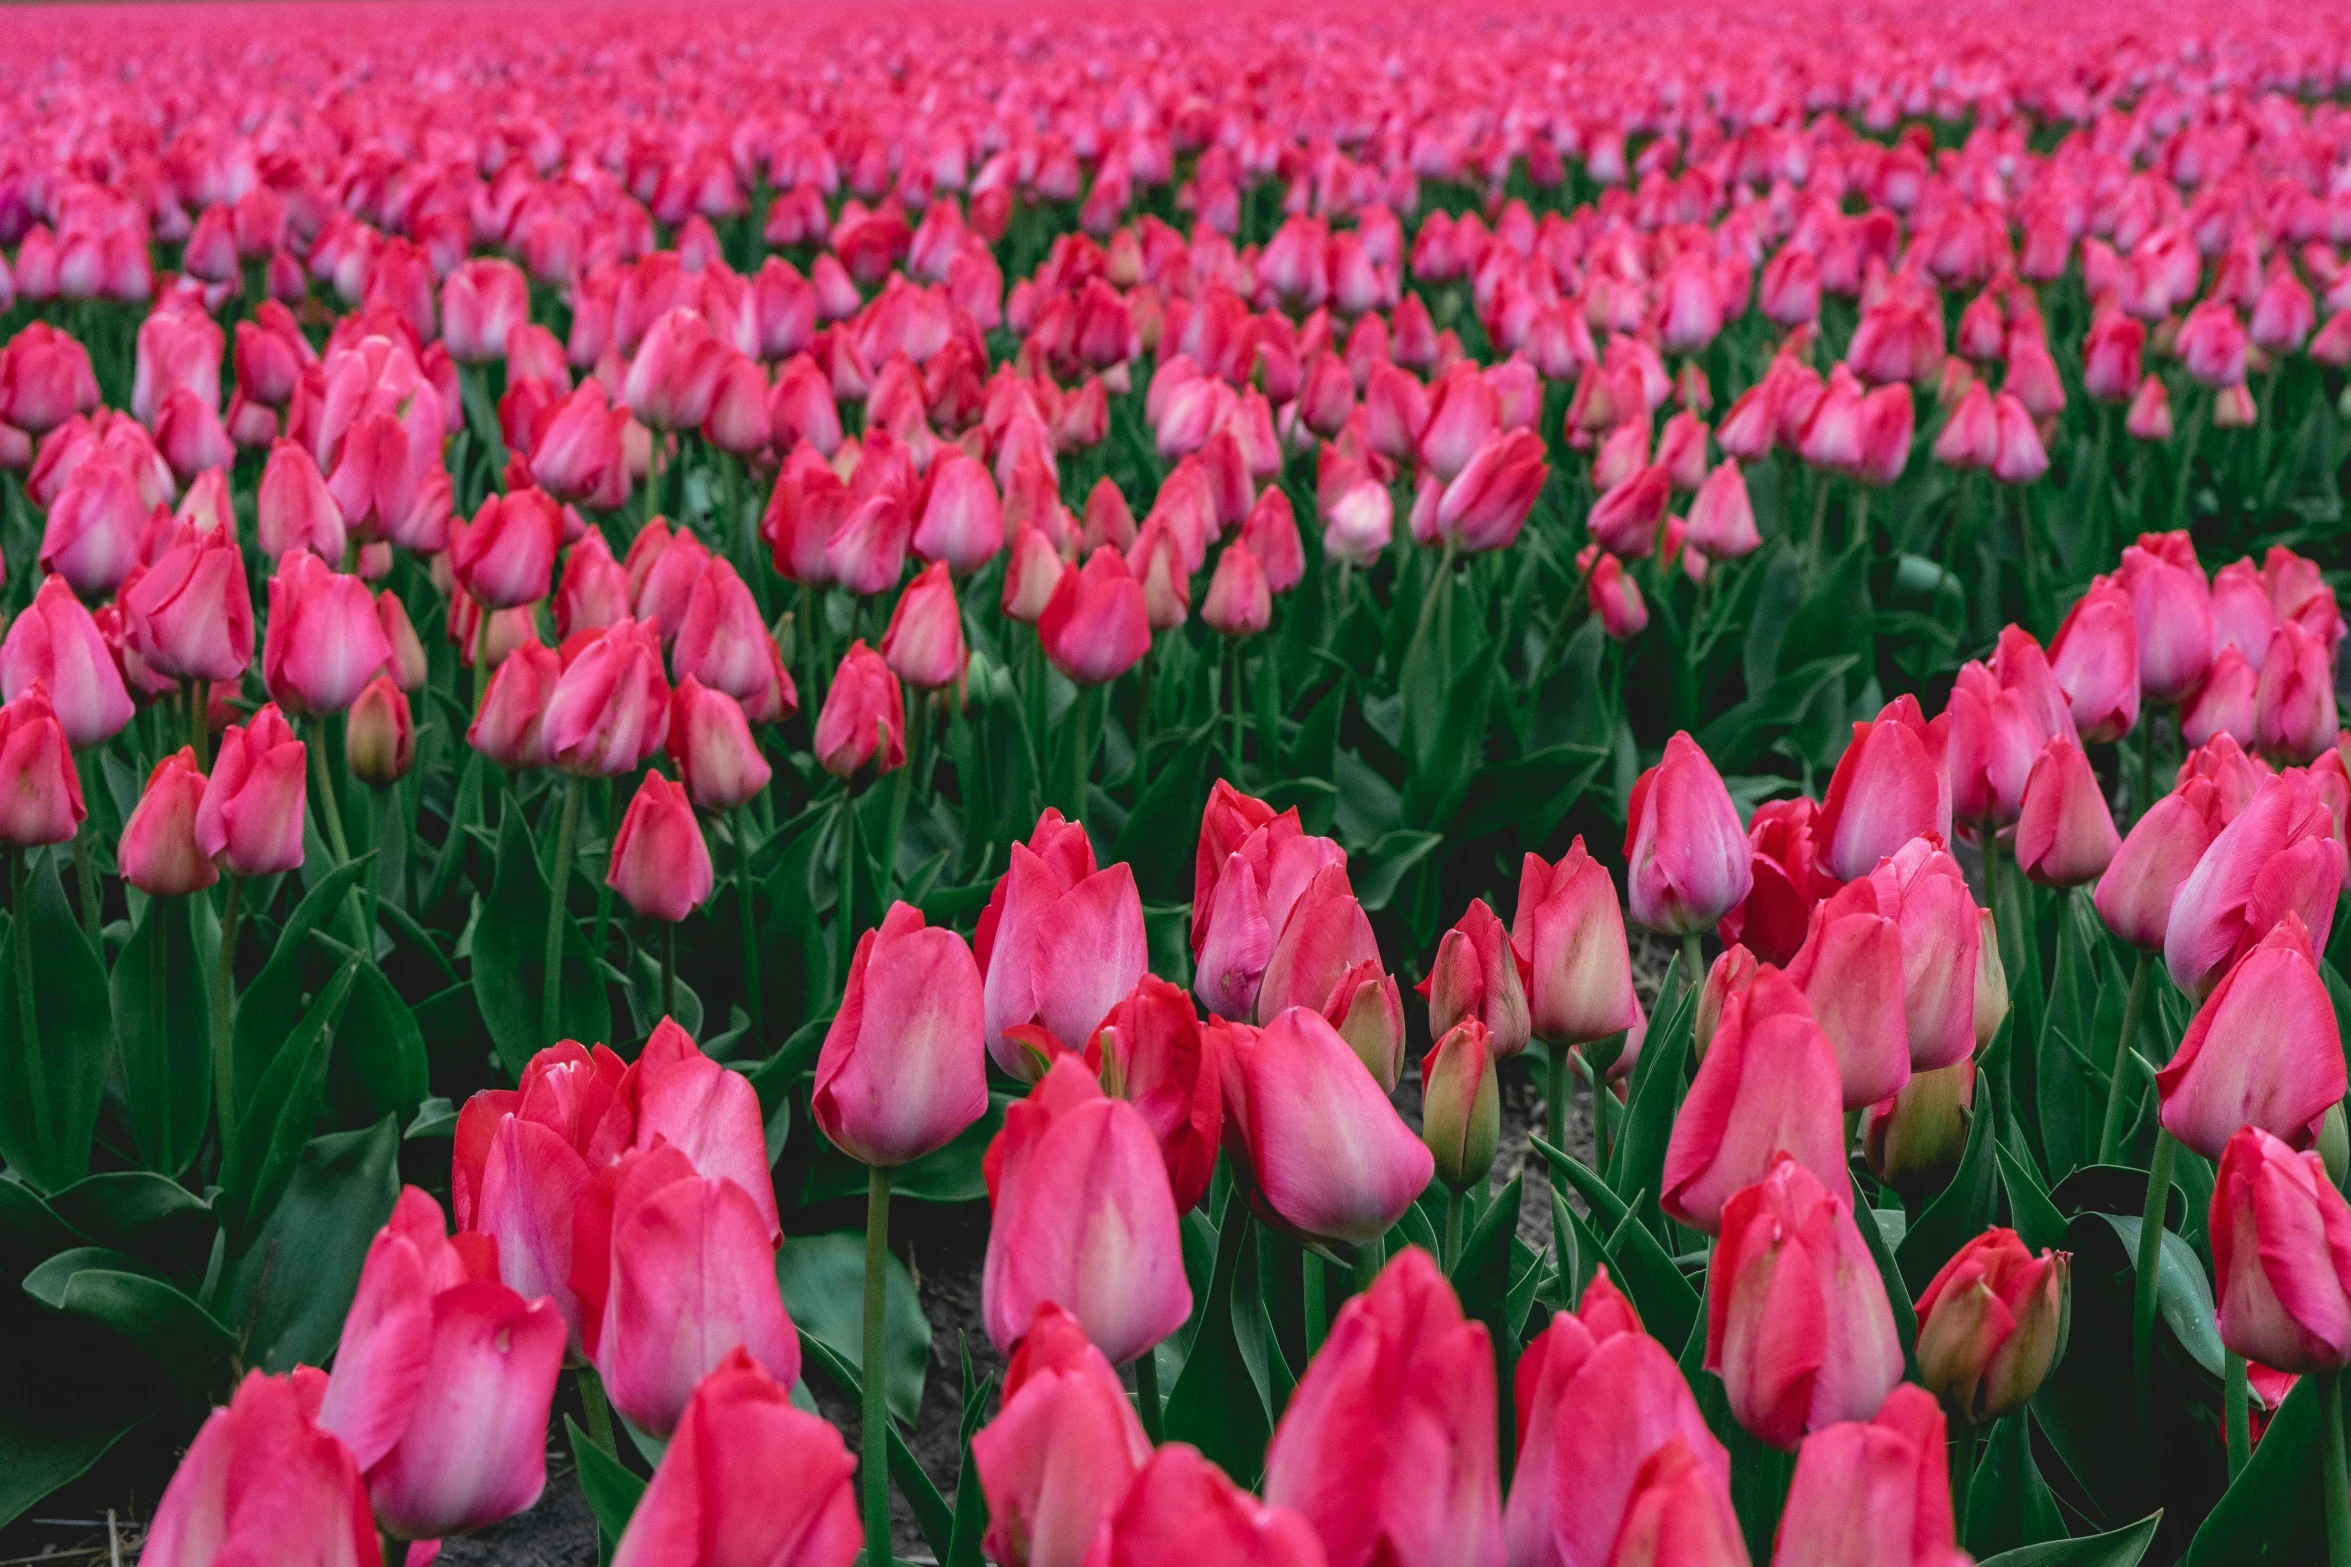 a field of pink tulips, with bright green leaves